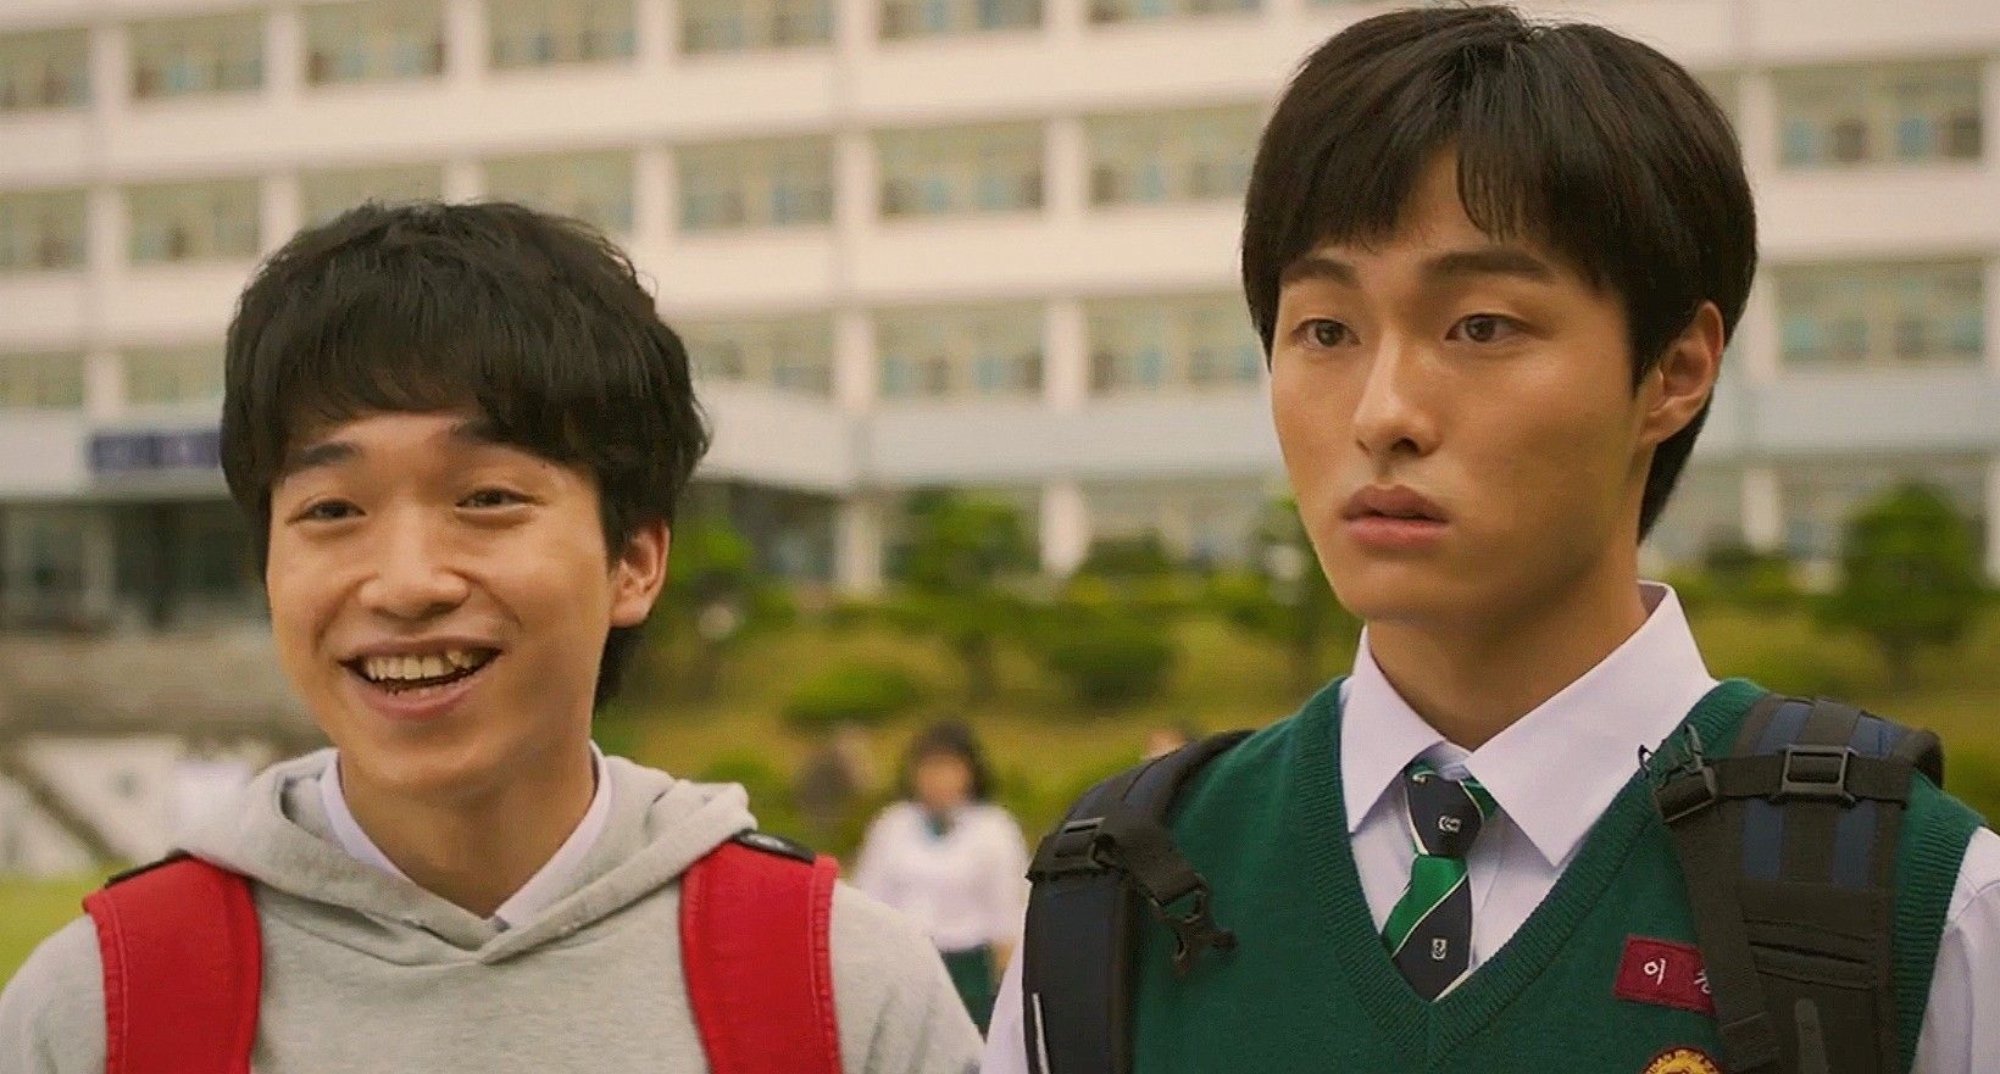 Gyeong-su and Cheong-san from 'All of Us Are Dead' outside of school.